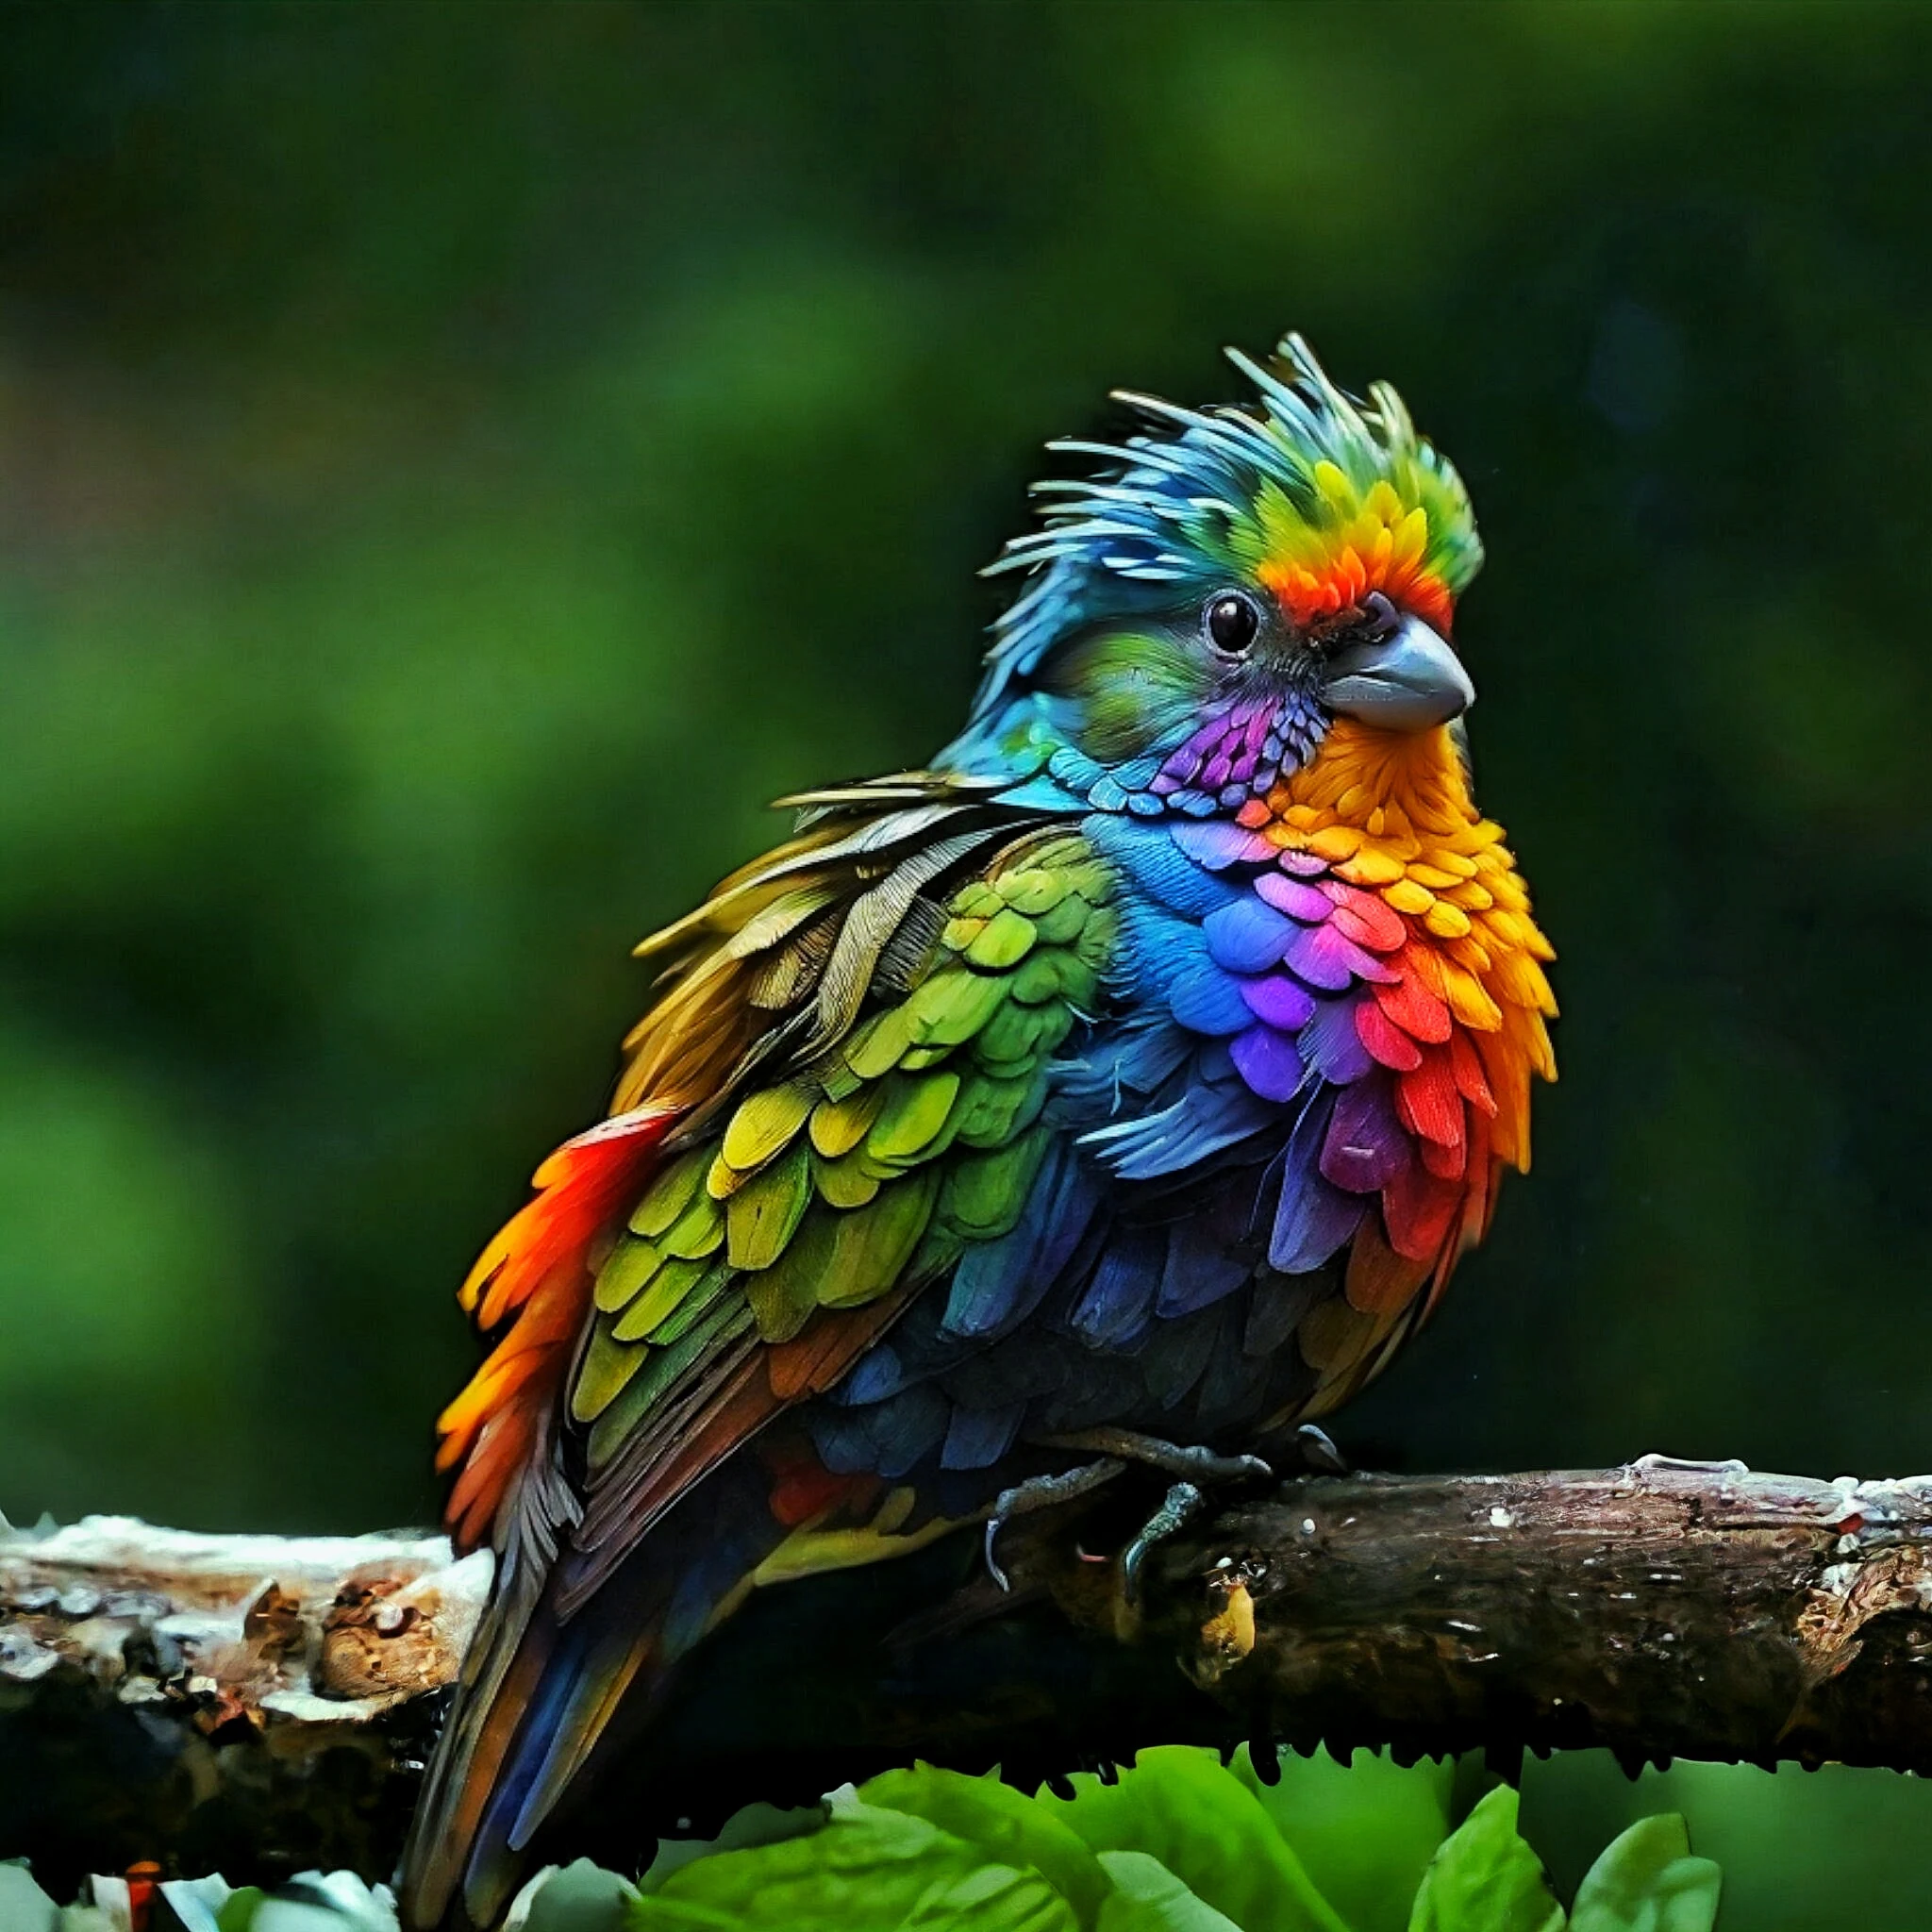 Colorful bird on a branch